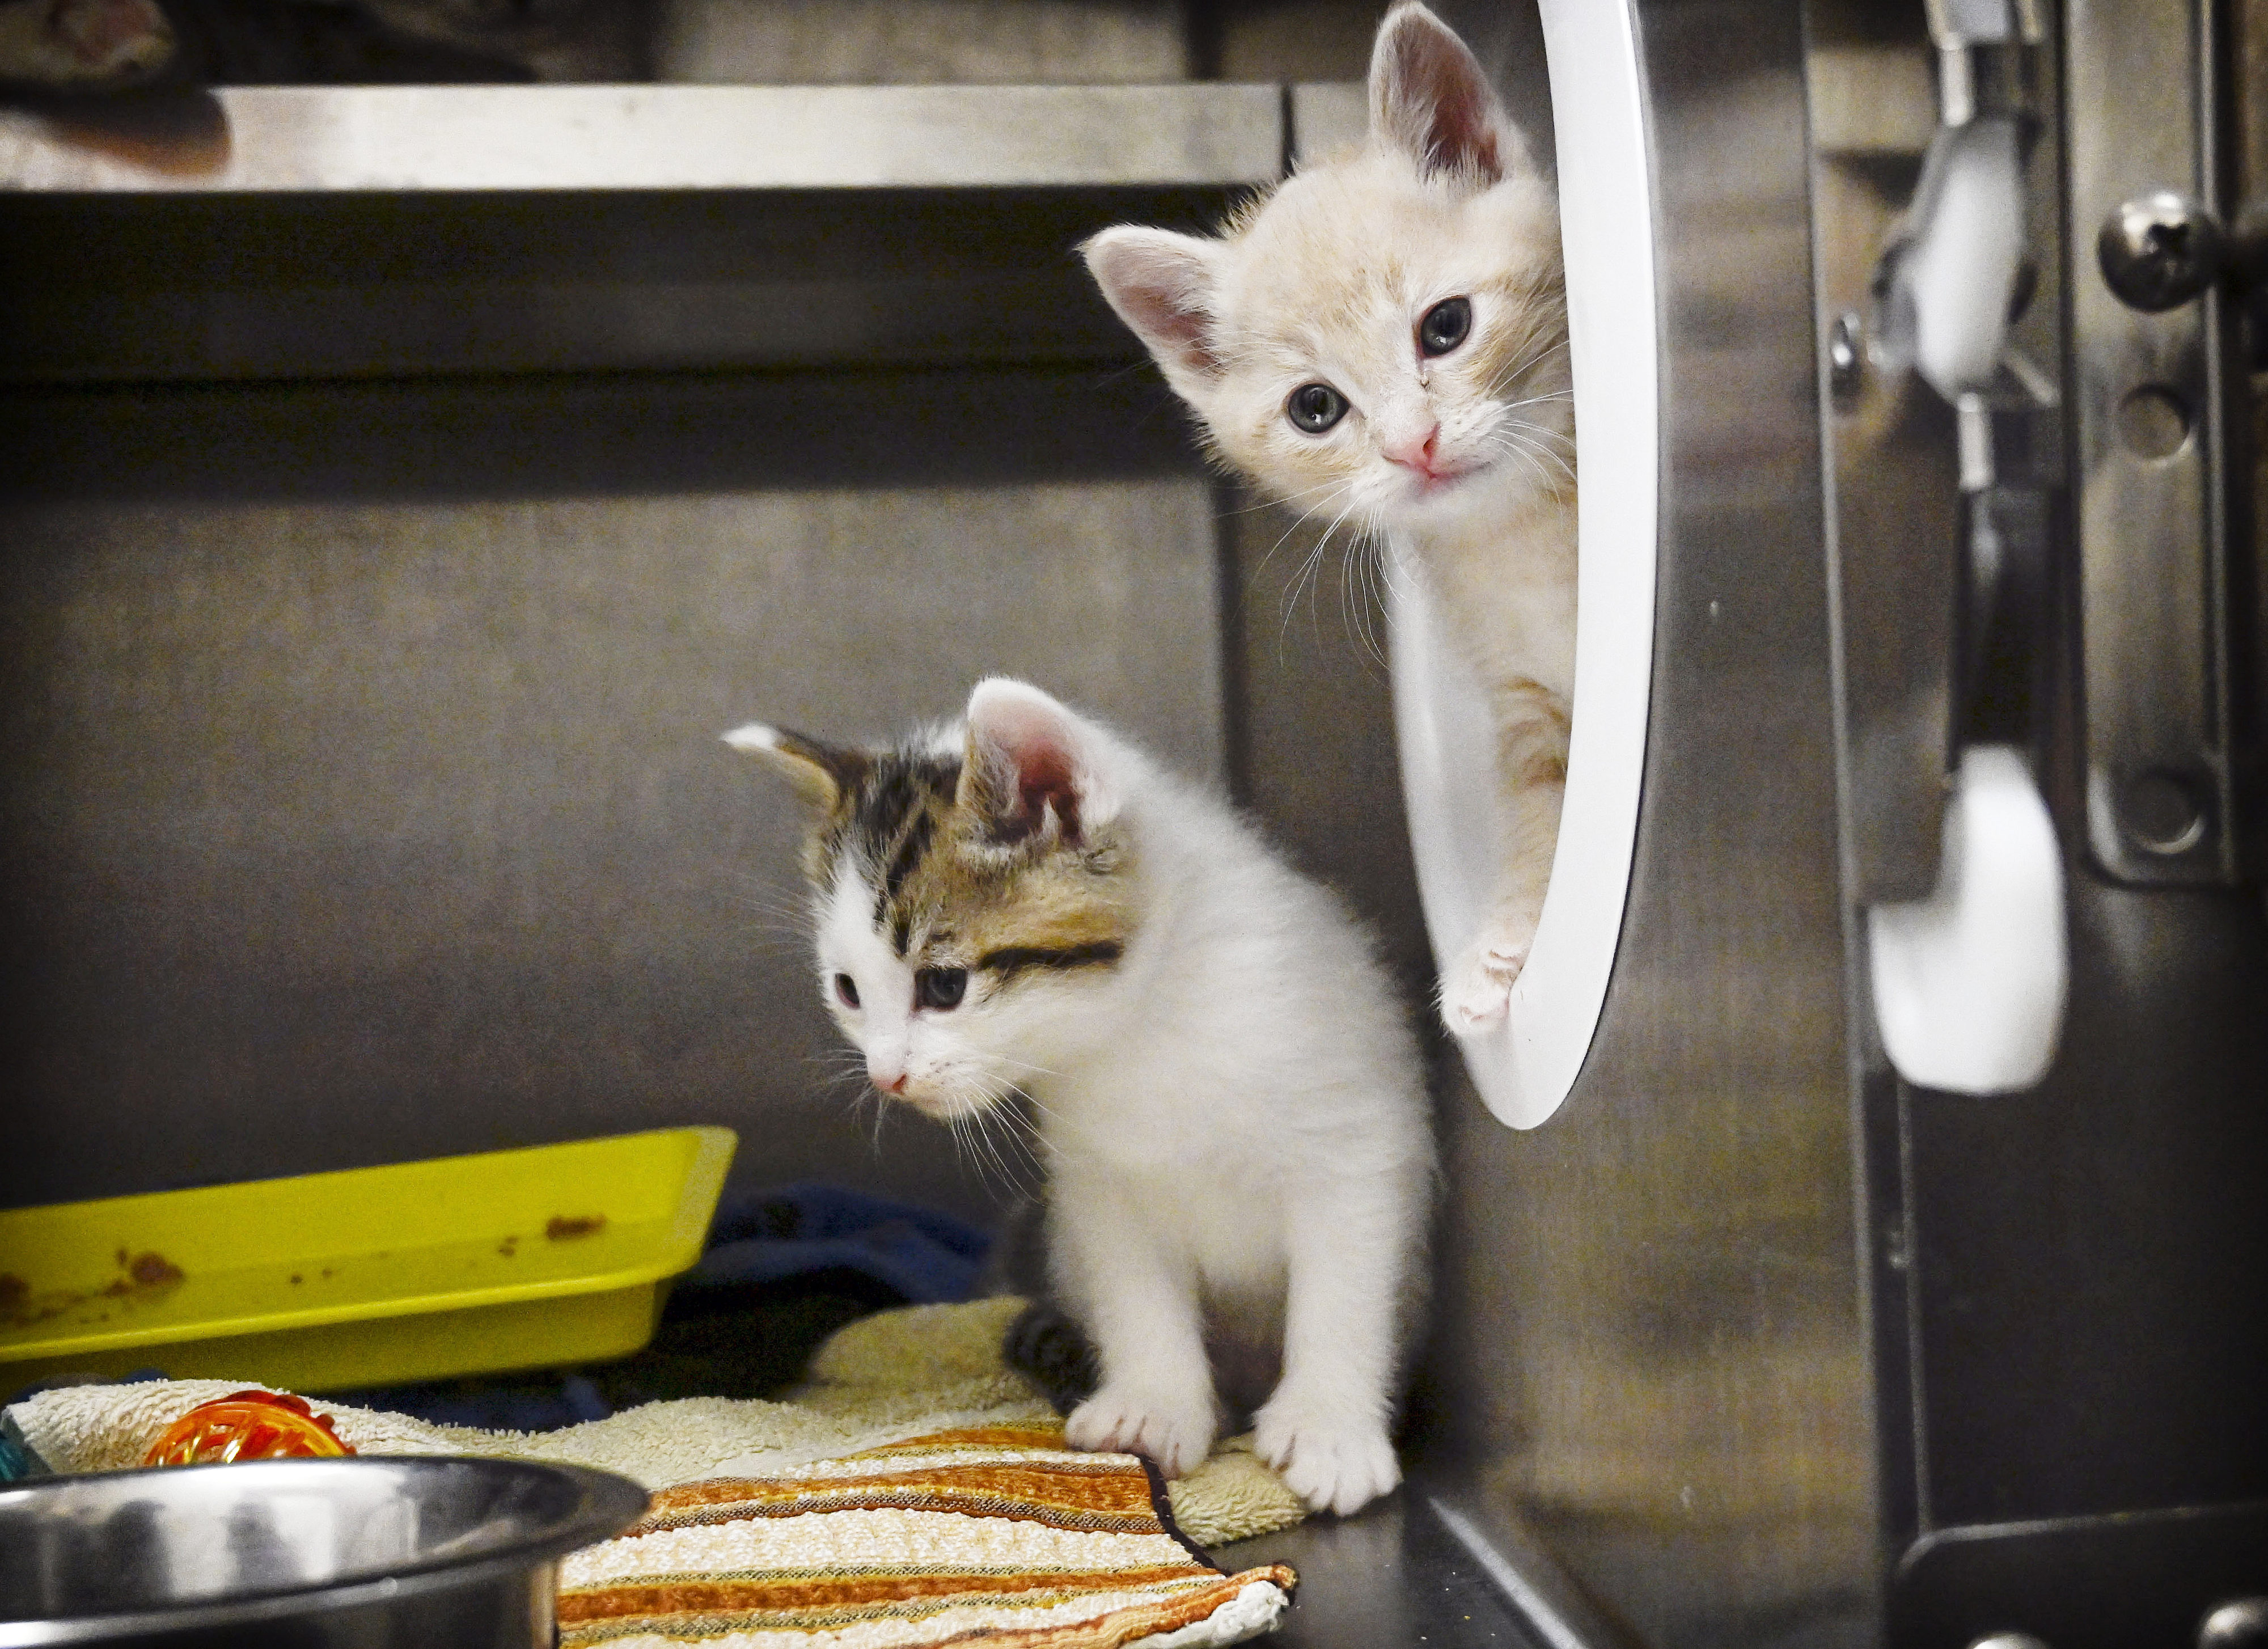 Kiittens at Friends of Upland Animal Shelter in Upland continue...